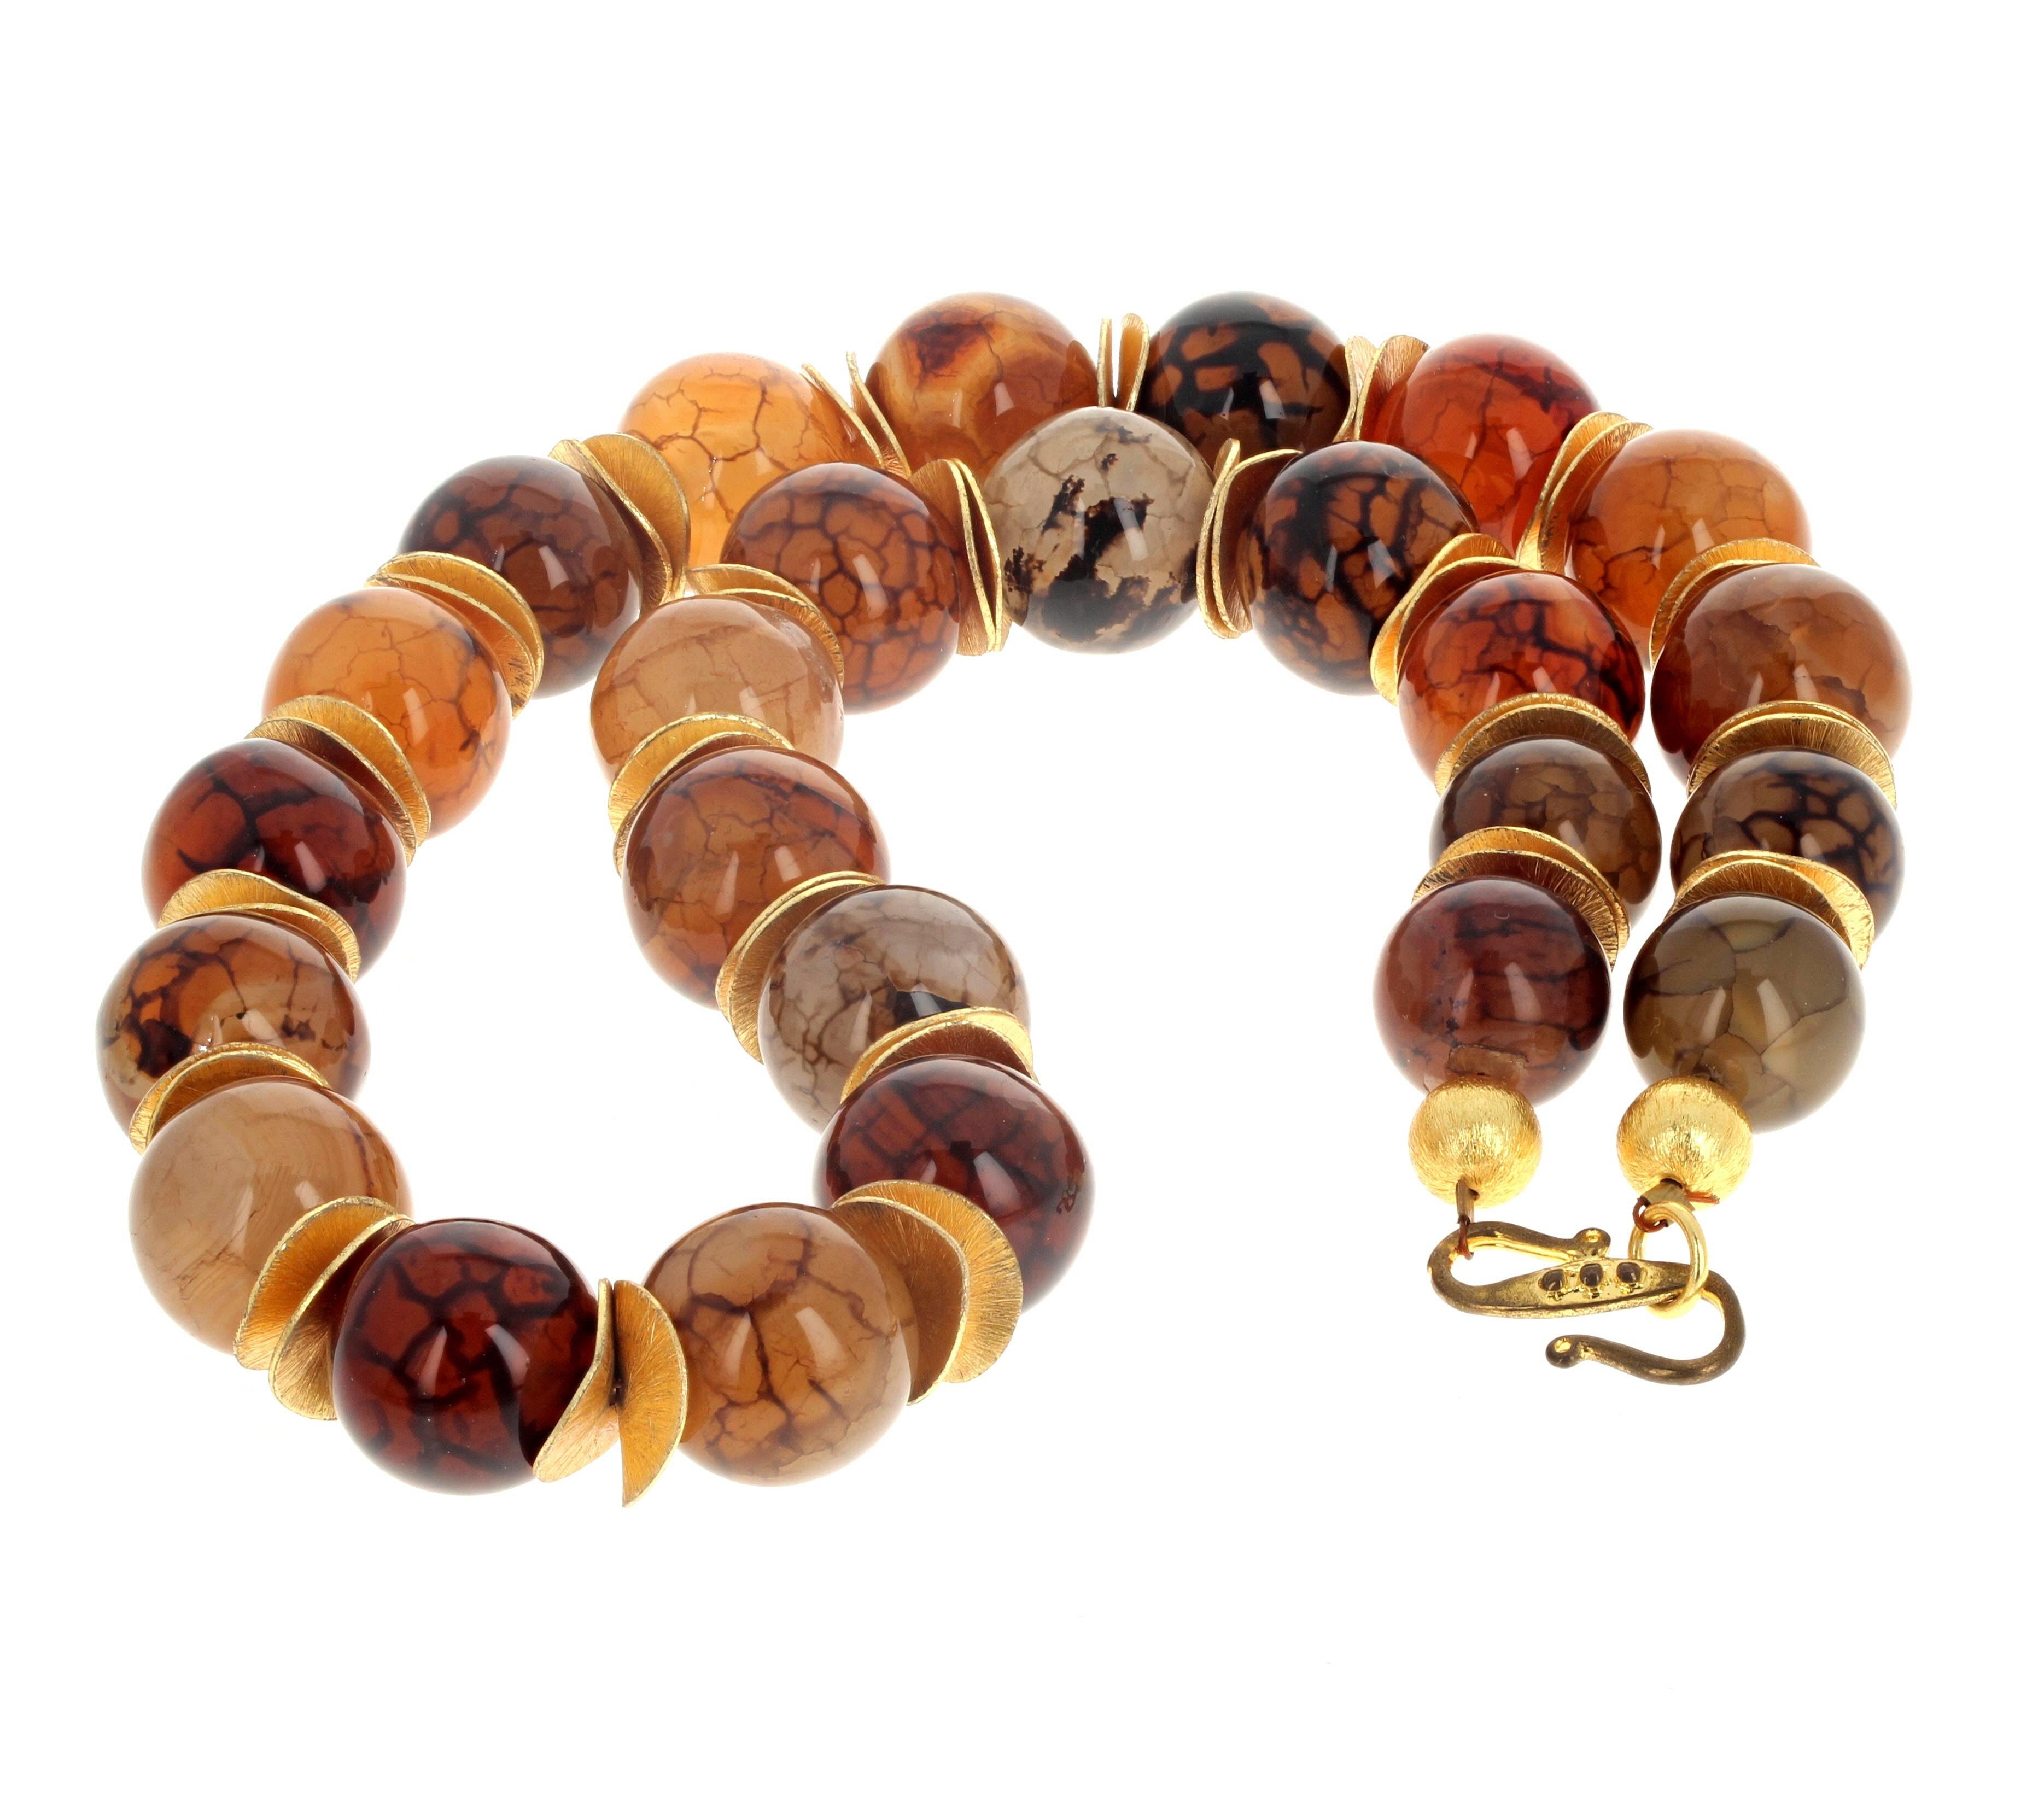 Women's or Men's AJD Magnificent Glowing Natural Spiderweb Agate 21